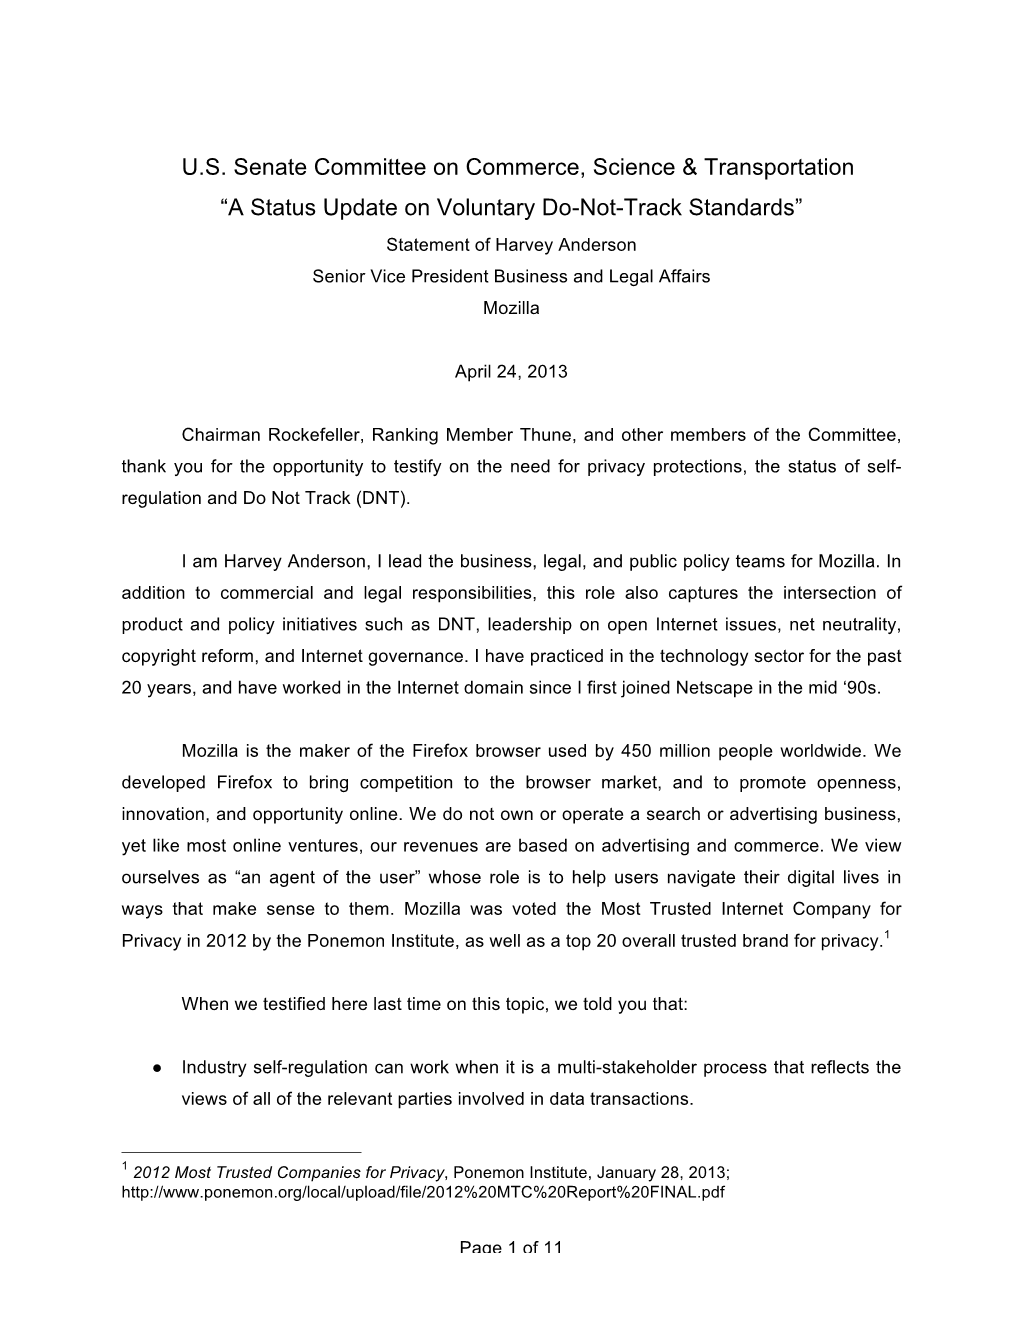 U.S. Senate Committee on Commerce, Science & Transportation “A Status Update on Voluntary Do-Not-Track Standards”